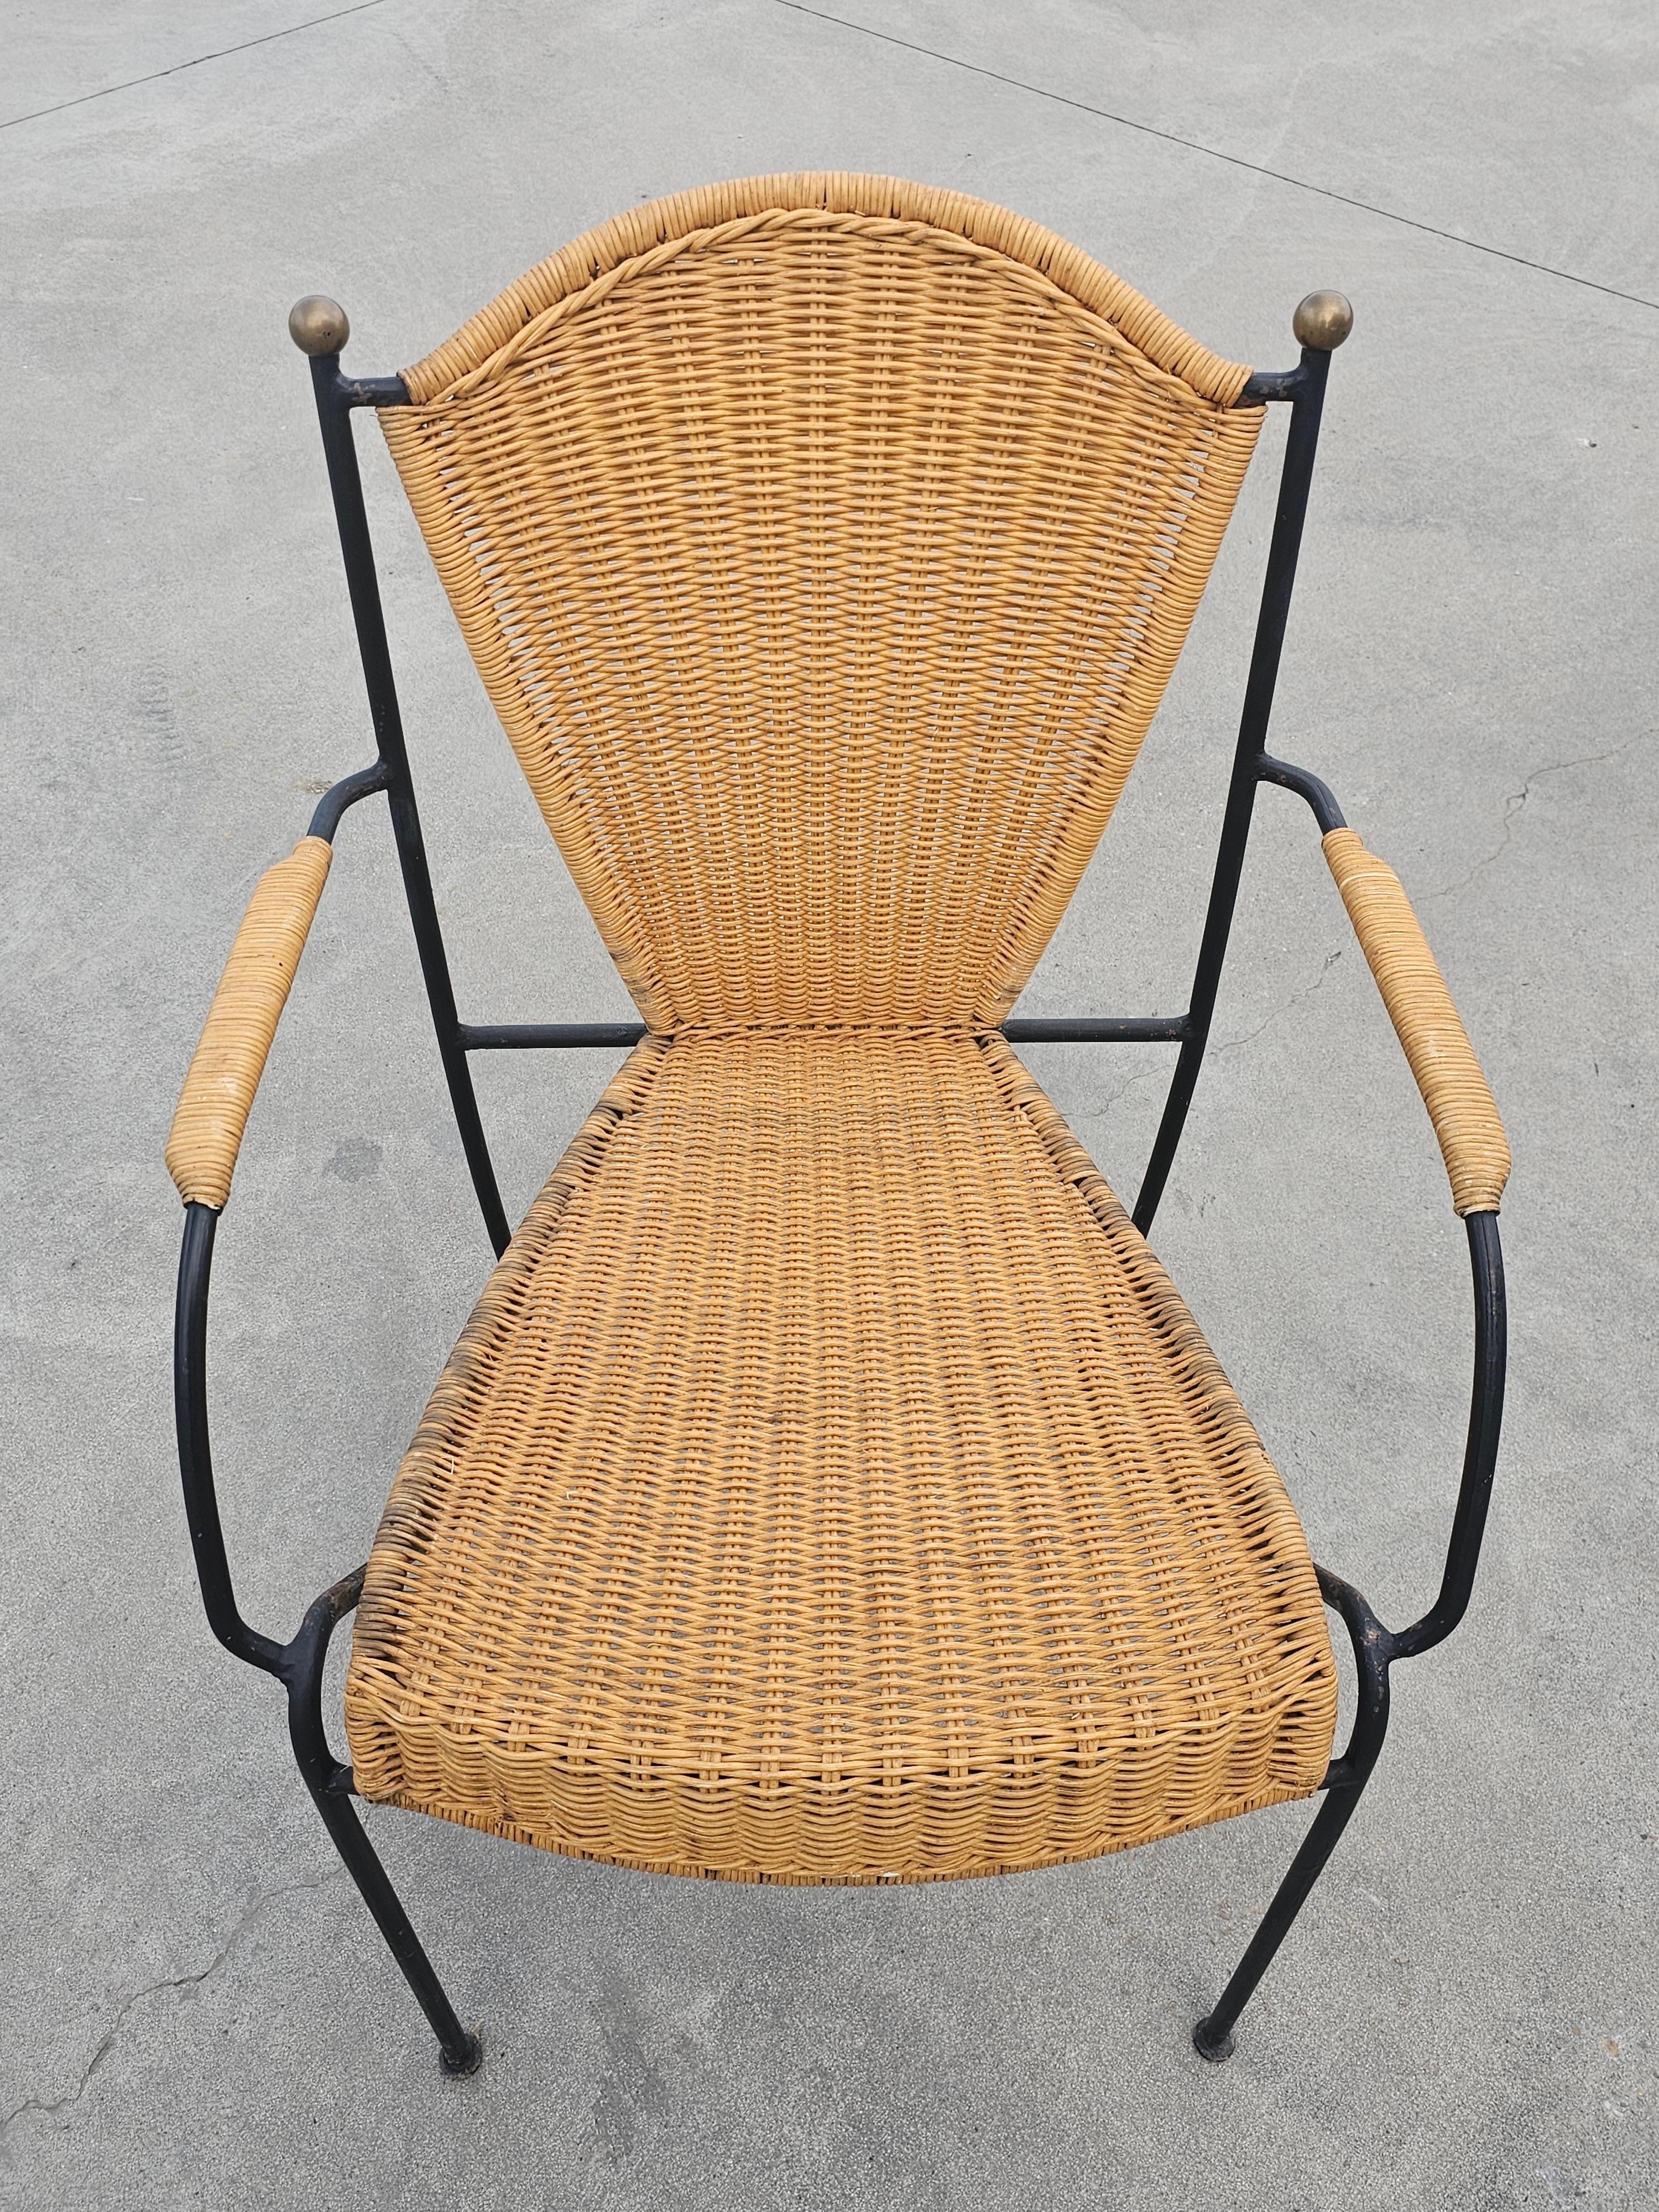 Pair of Frederic Weinberg Wicker, Wrought Iron and Brass Chairs, USA 1950s For Sale 4